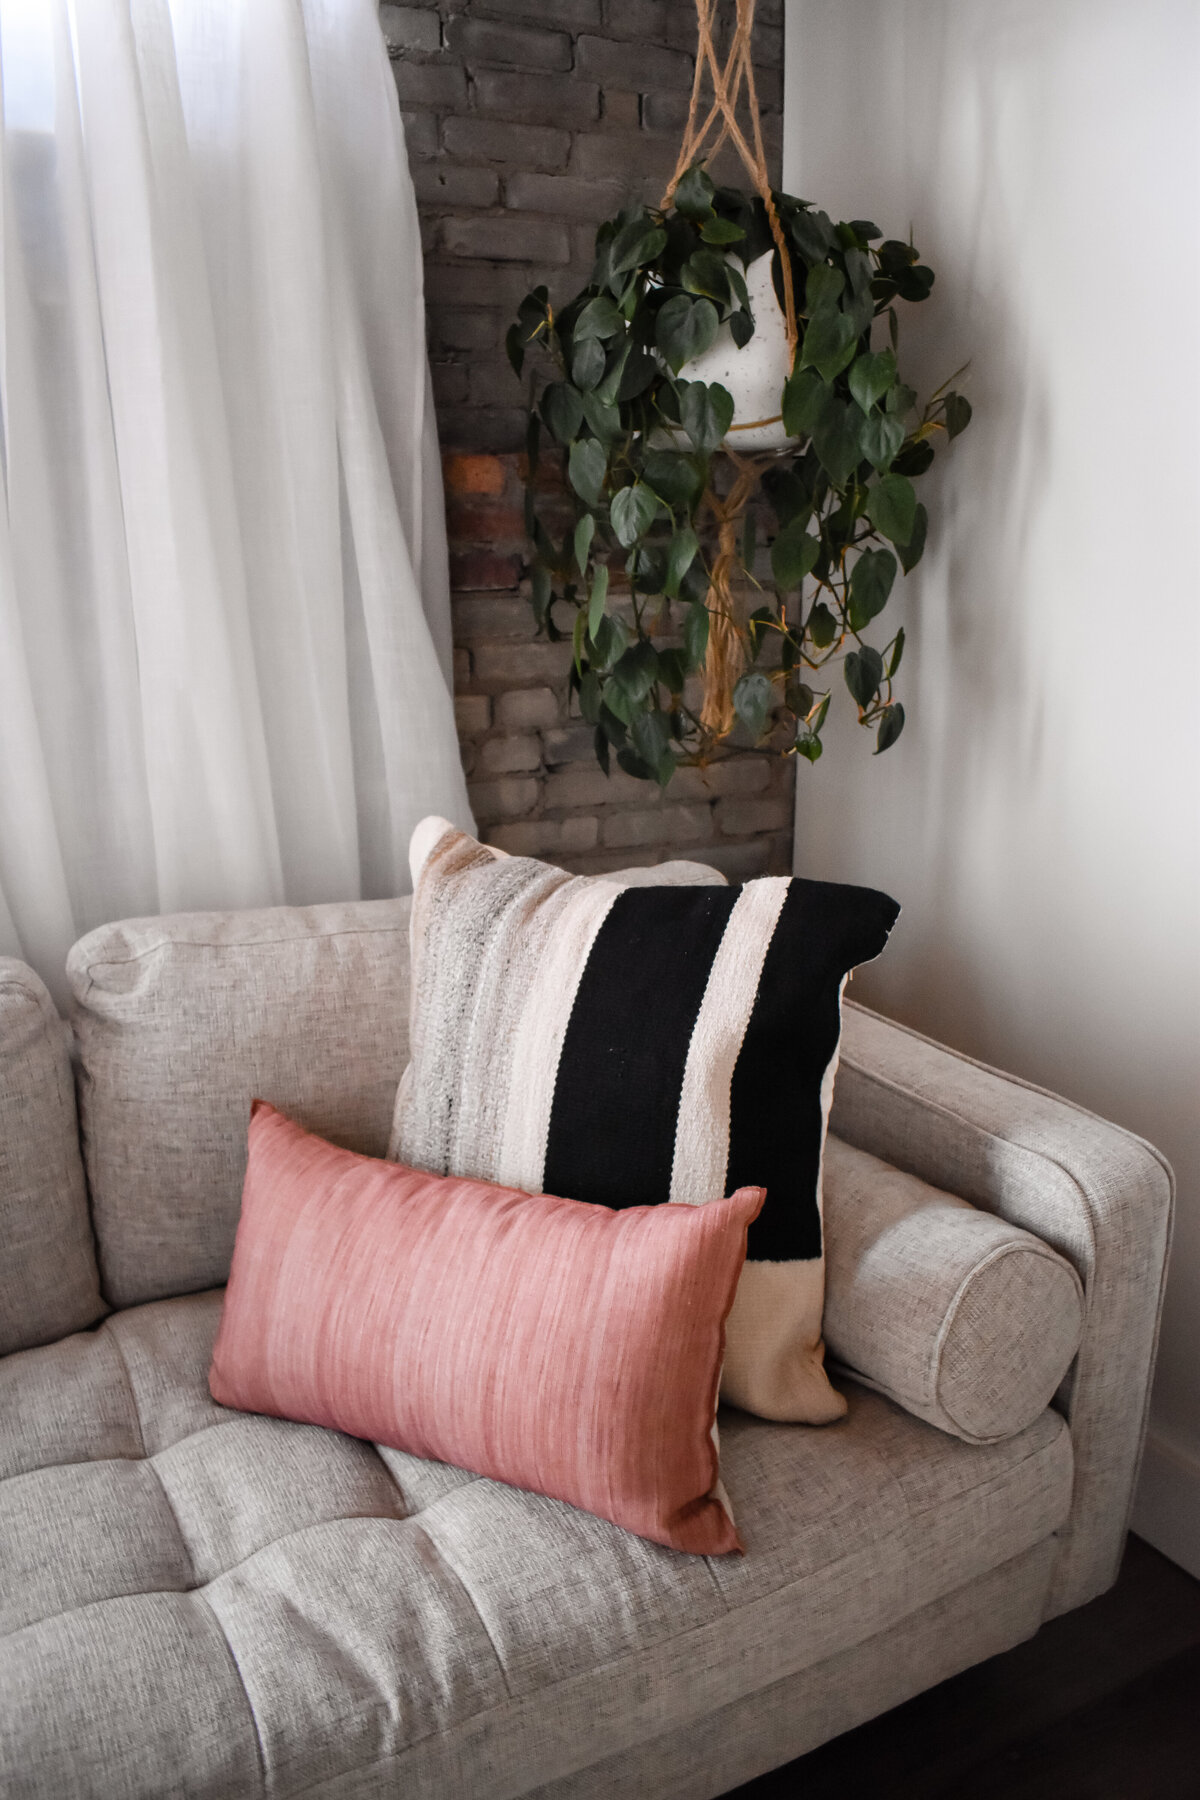 Pink and black and white pillows sit on a grey tufted couch